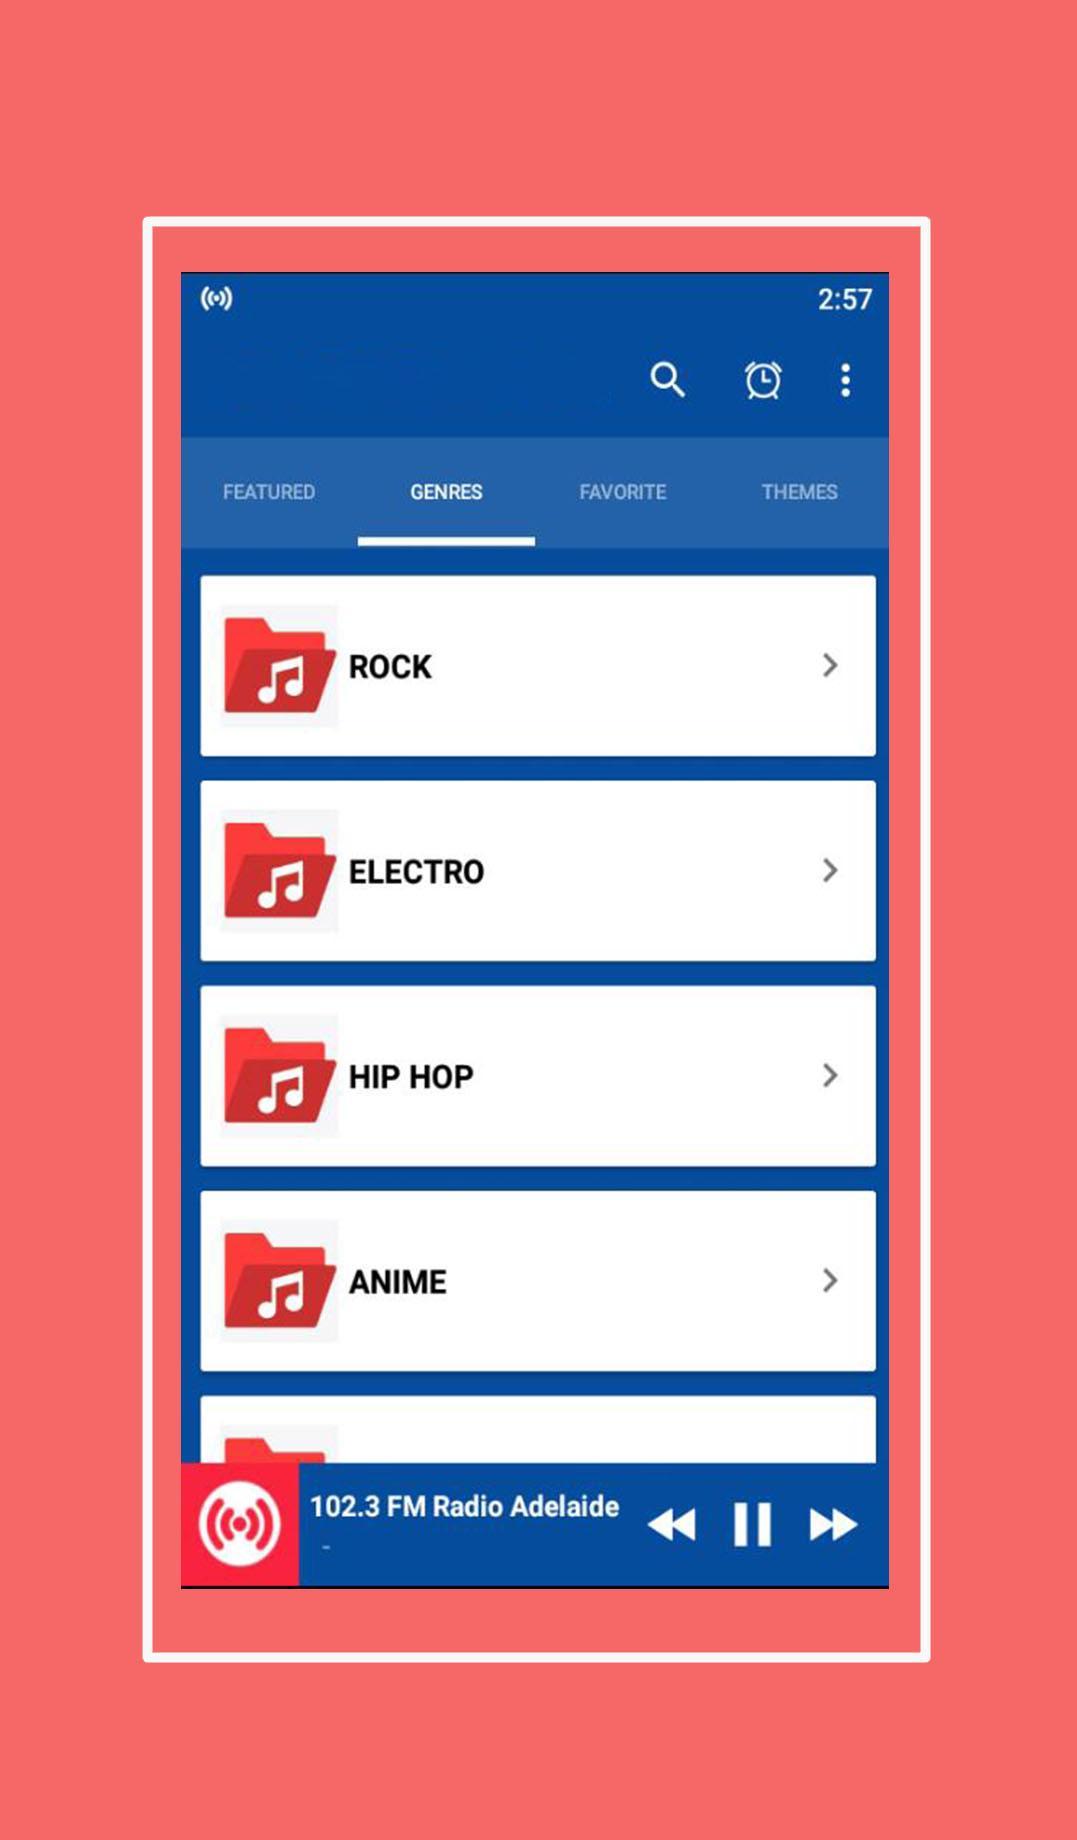 zona m1 radio mk for Android - APK Download